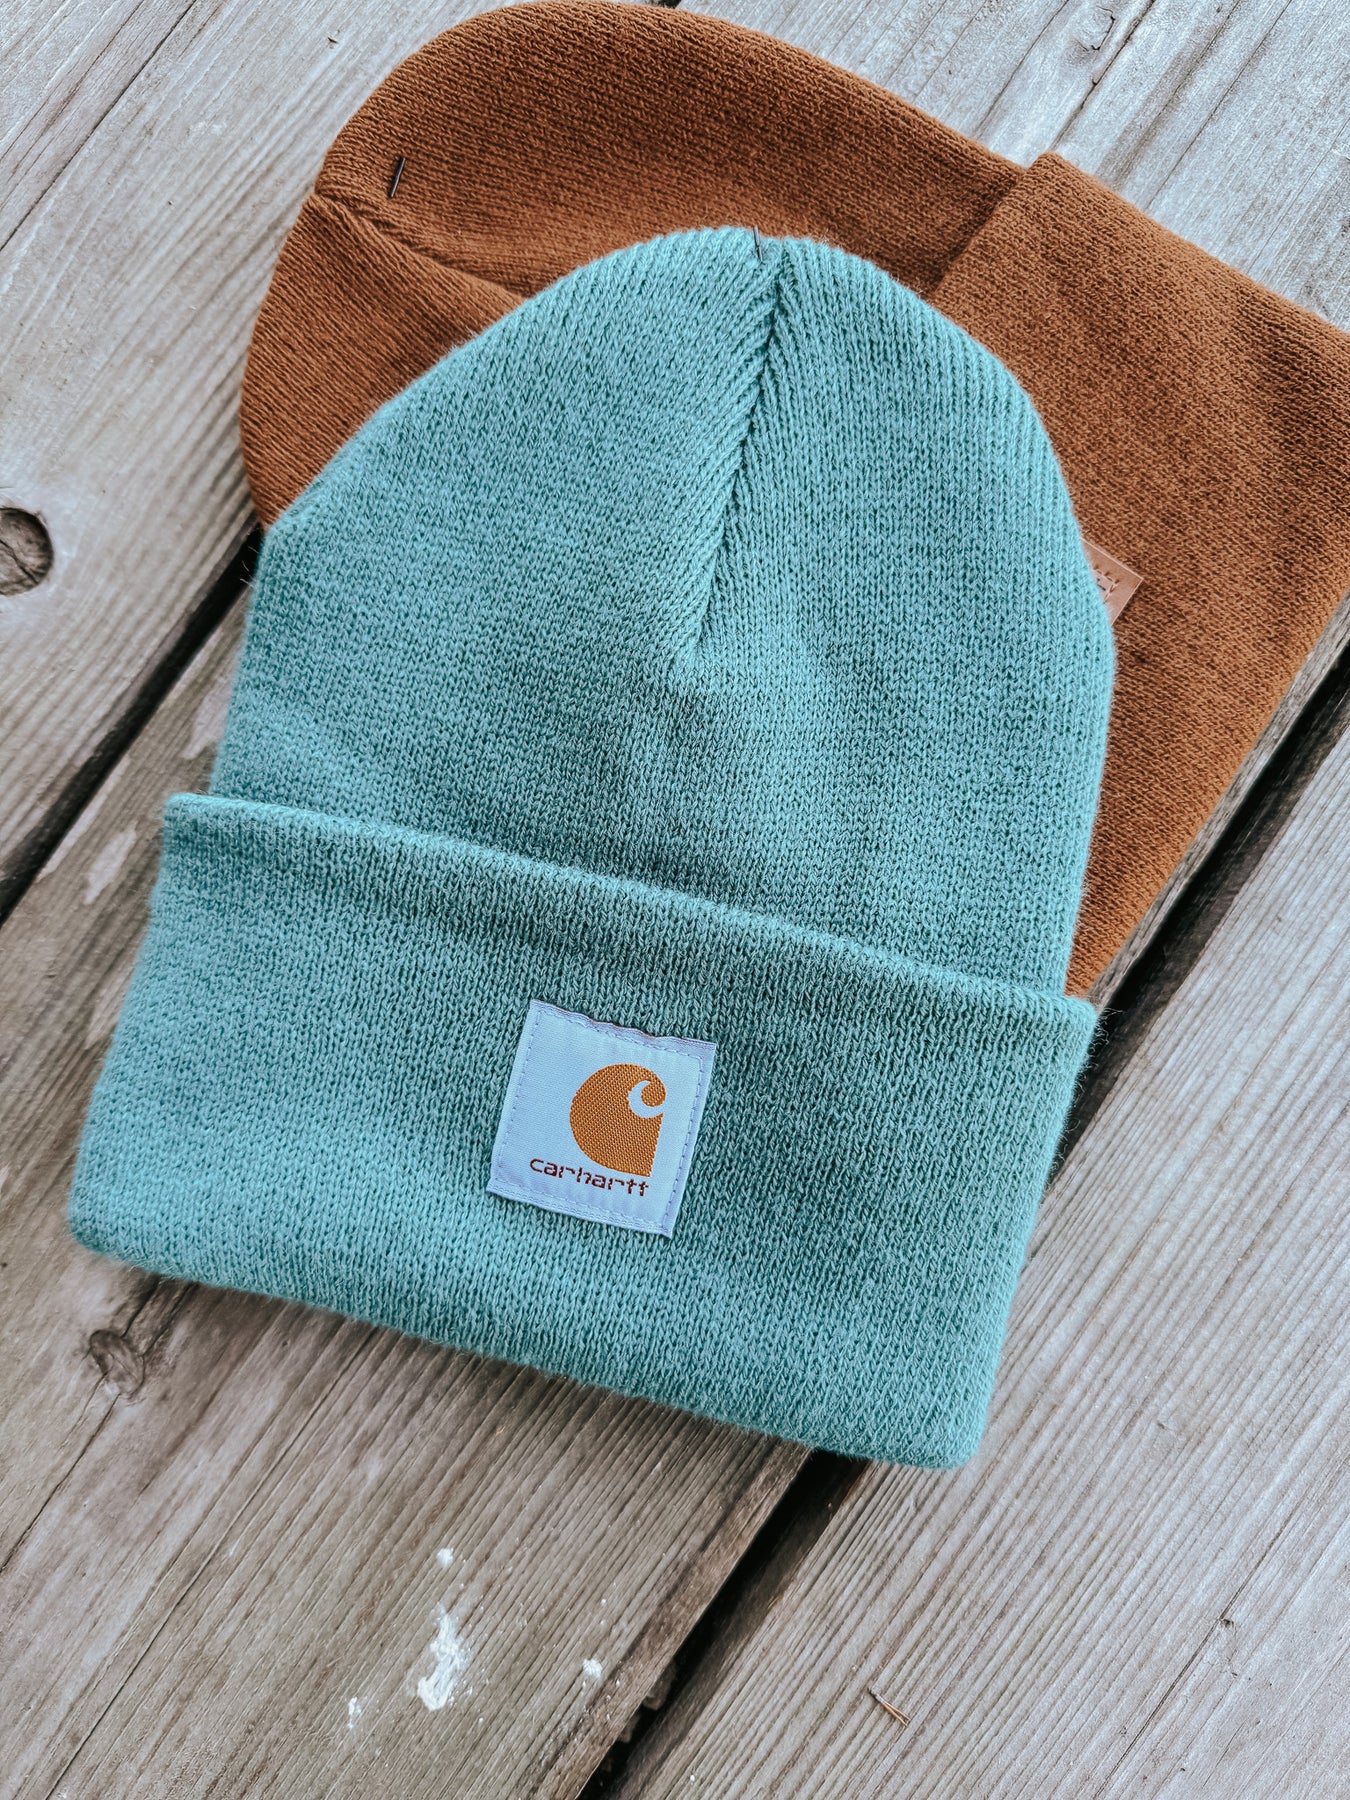 Carhartt Patch Beanie in Sea – Country Boot Pine